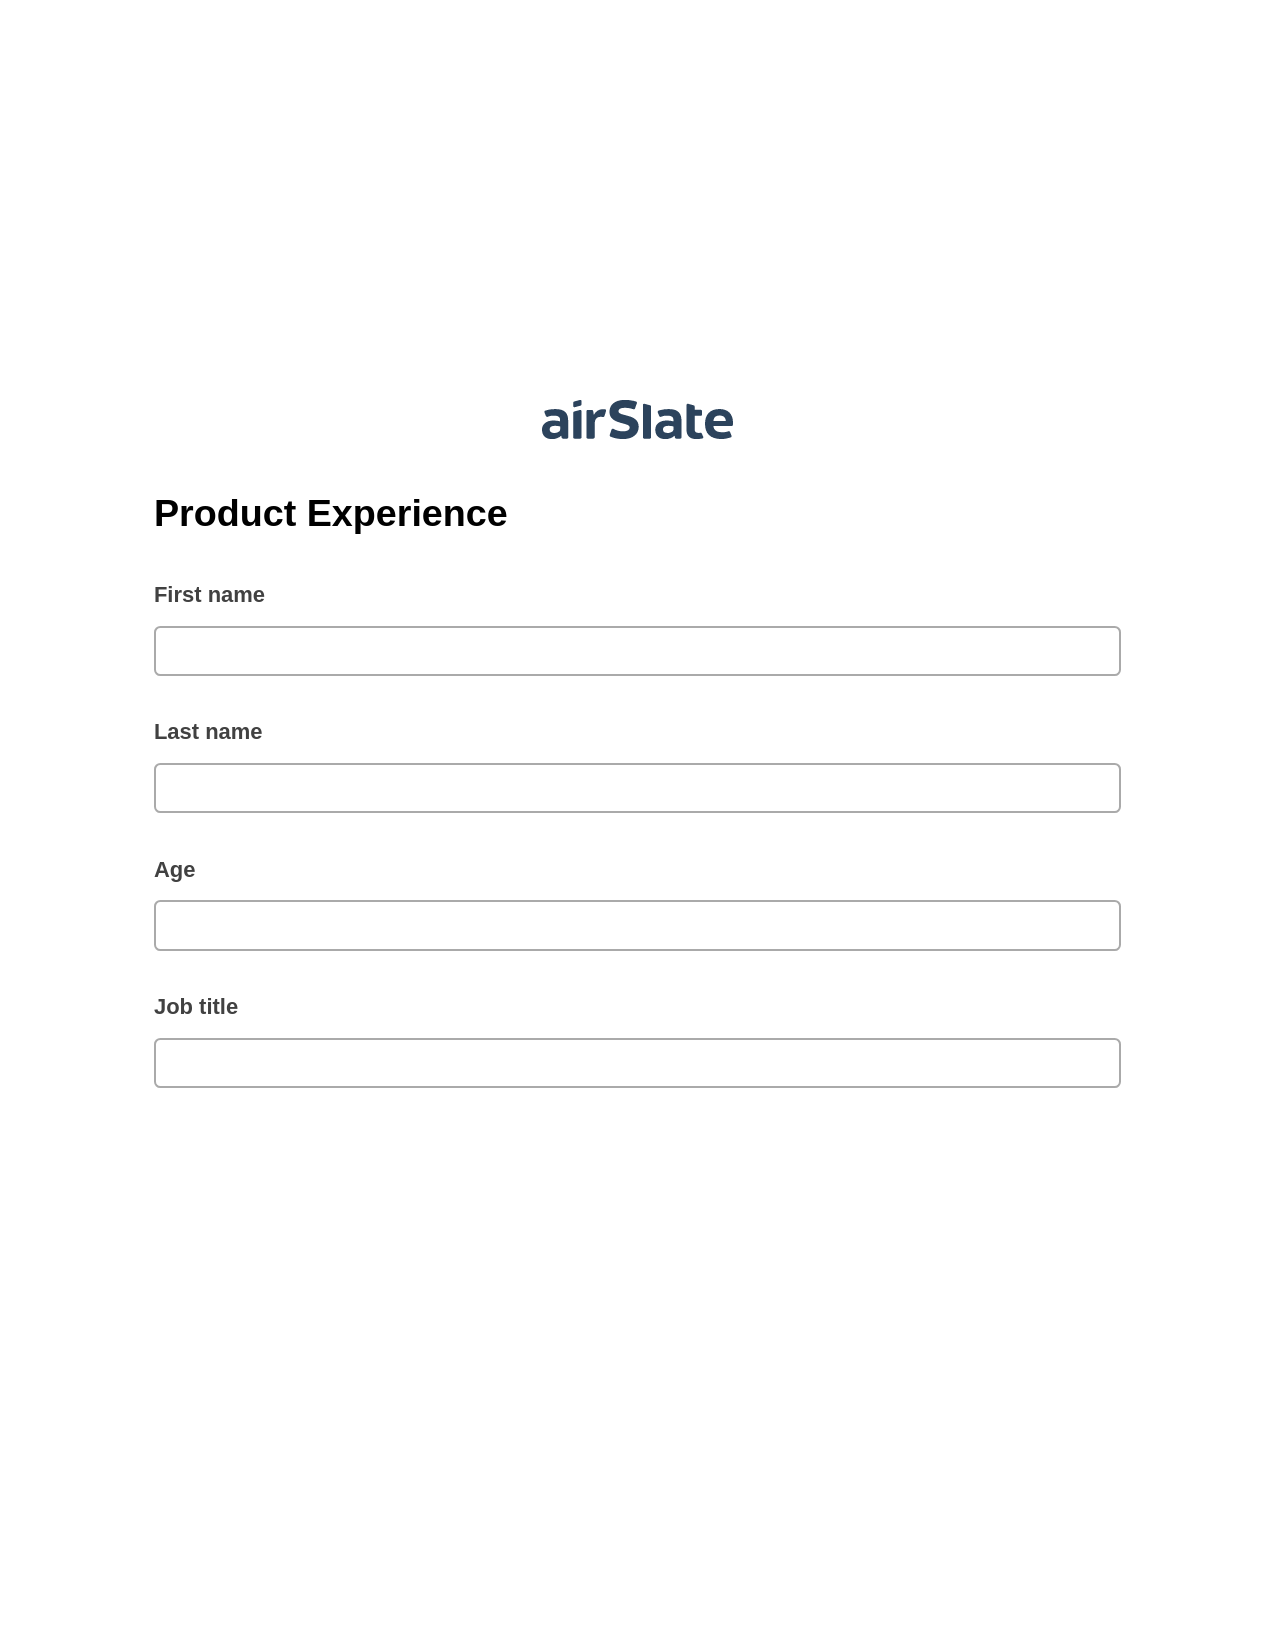 Multirole Product Experience Pre-fill from Salesforce Records Bot, Hide Signatures Bot, Export to Smartsheet